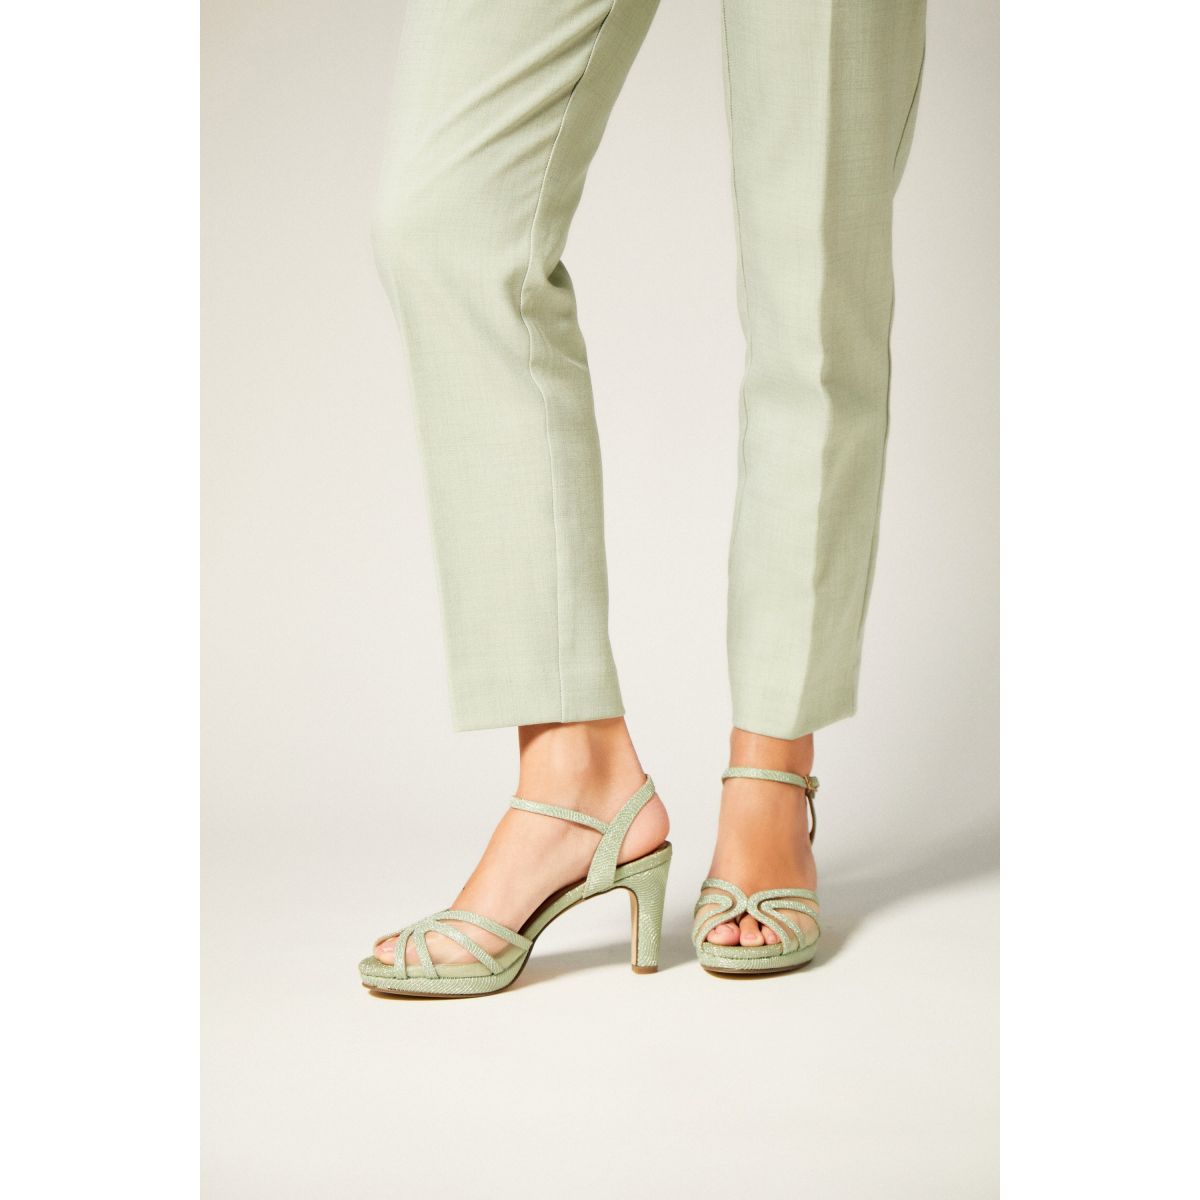 Frontal view of the Menbur mint green sandal, emphasising the stylish front straps.